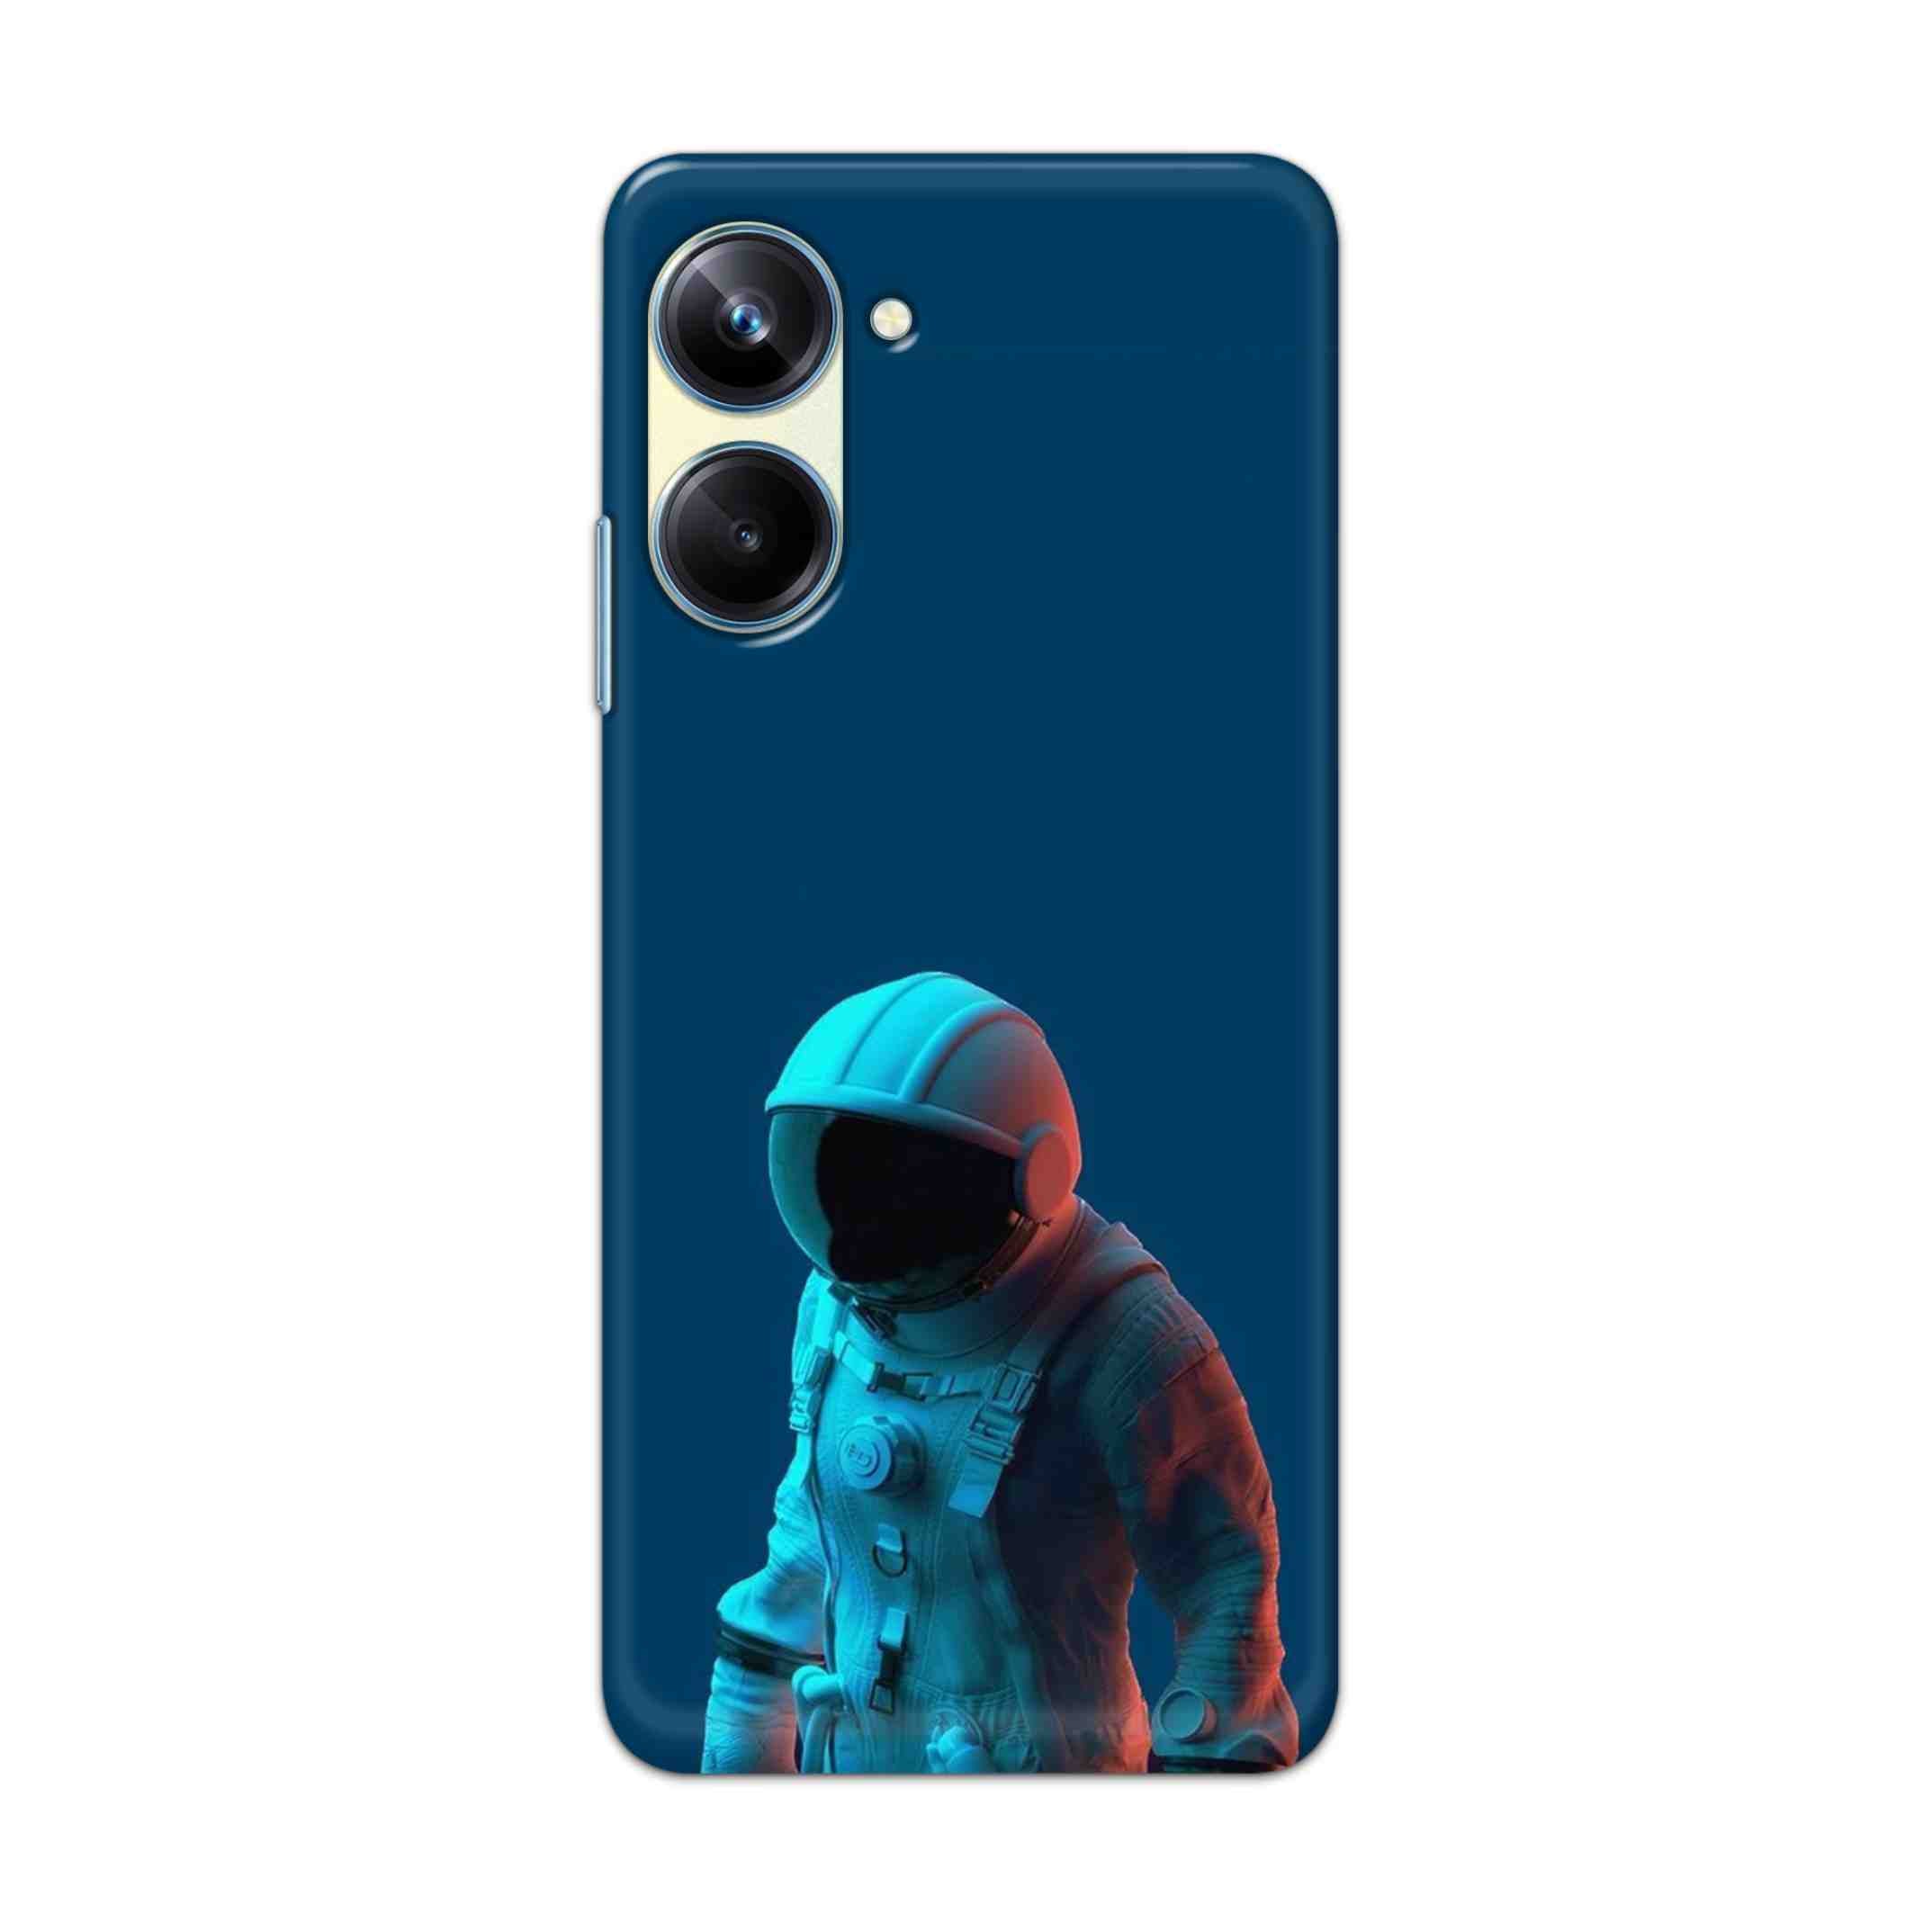 Buy Blue Astronaut Hard Back Mobile Phone Case Cover For Realme 10 Pro Online